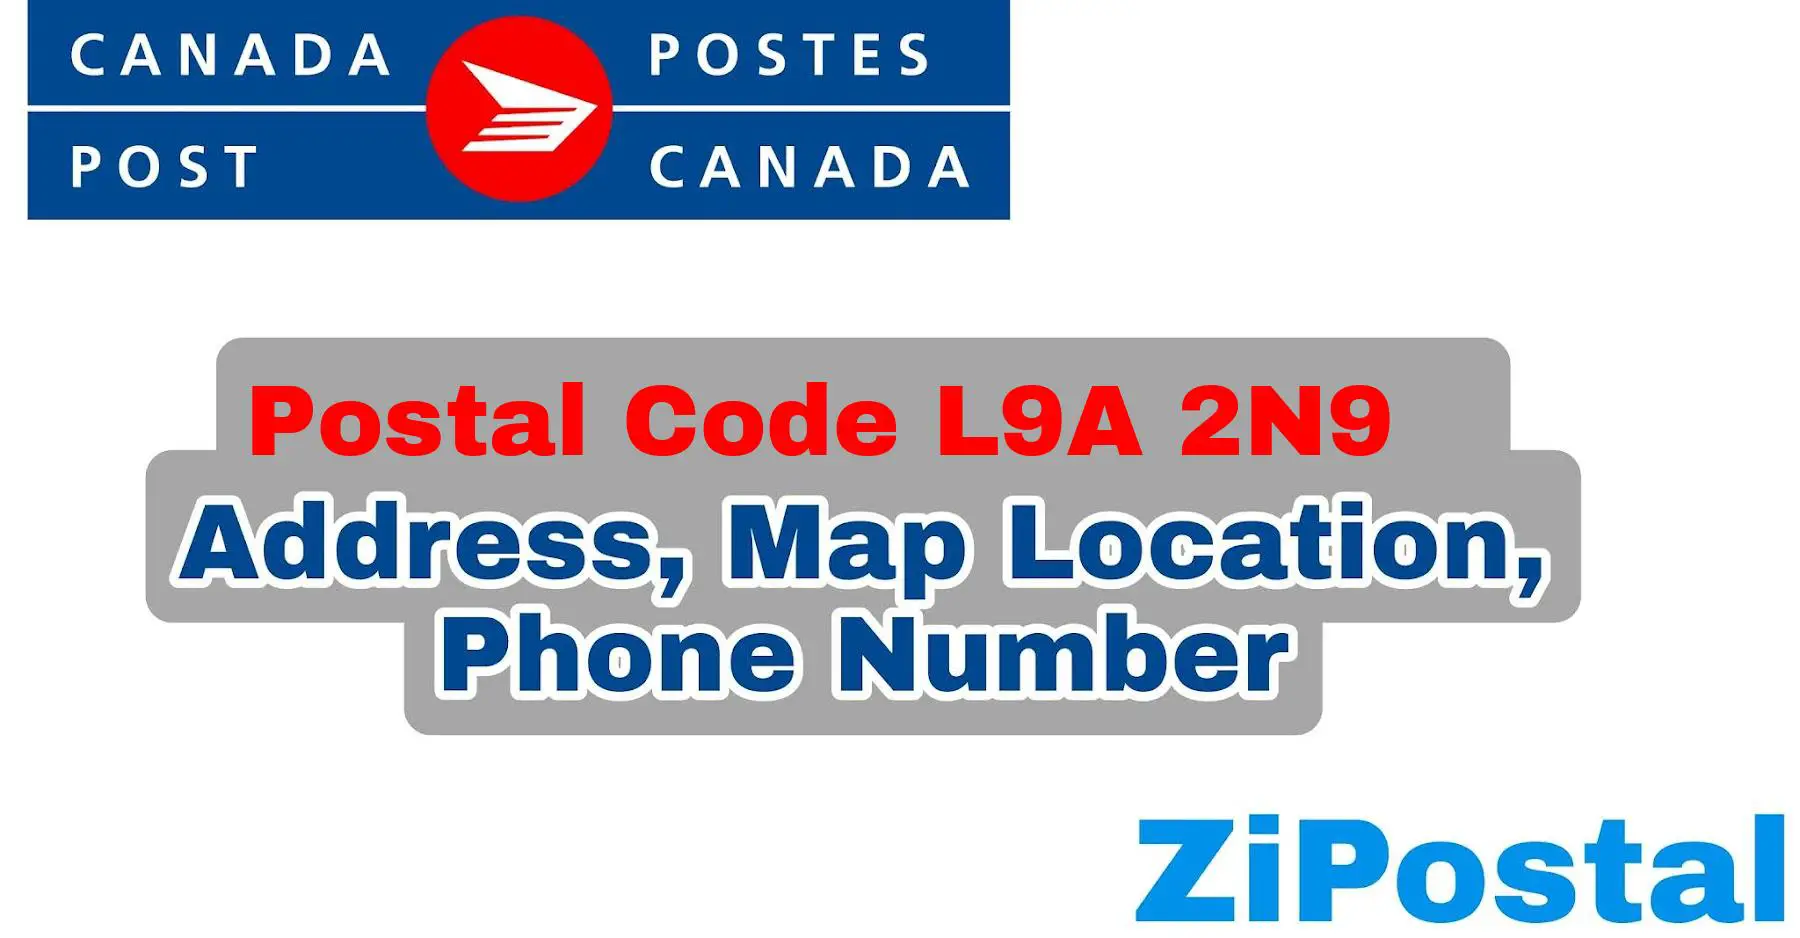 Postal Code L9A 2N9 Address Map Location and Phone Number